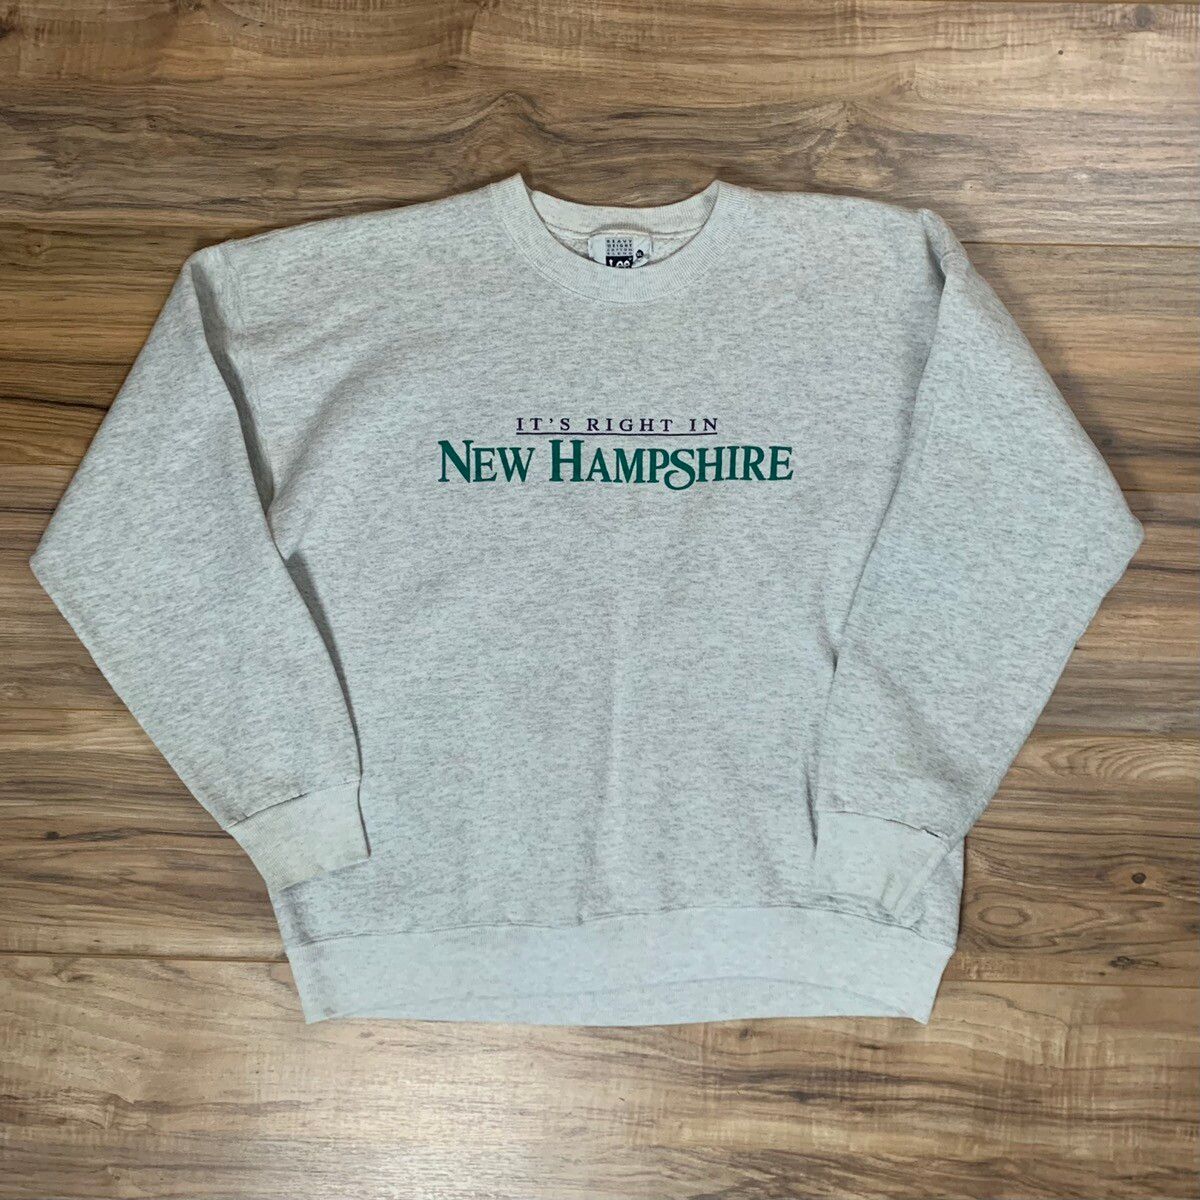 Vintage It’s Right In New Hampshire Crewneck Size US XL / EU 56 / 4 - 1 Preview